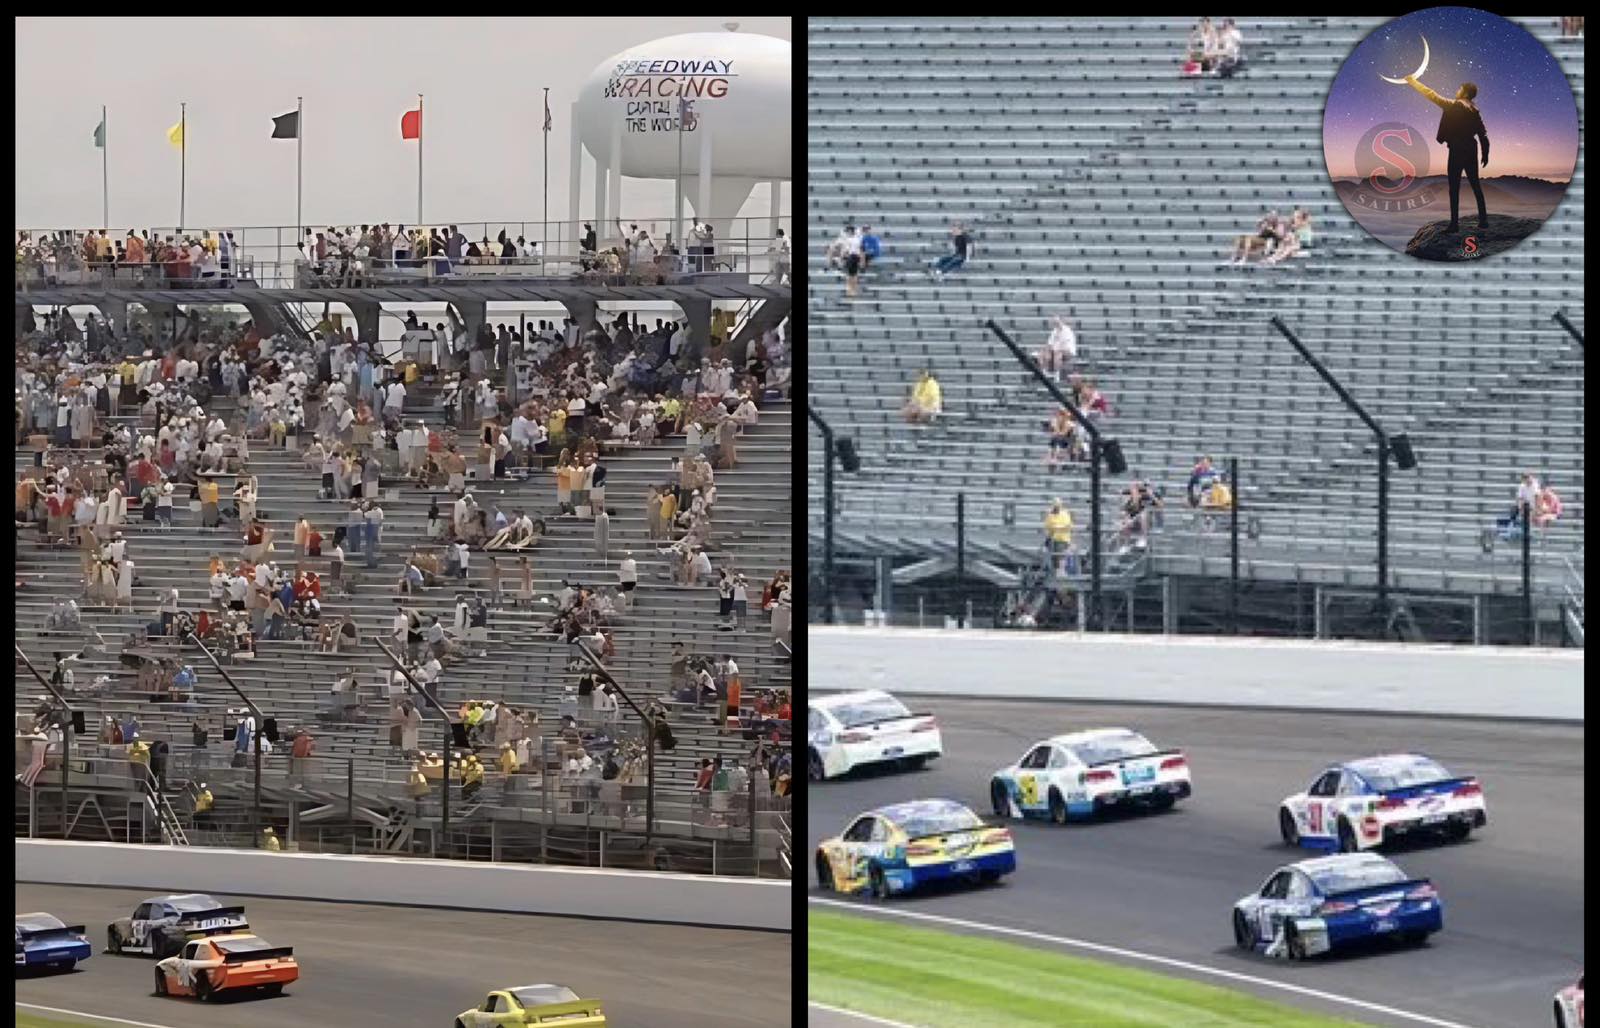 Talladega “Pride Day” Sets Record for Lowest Attendance in Track History